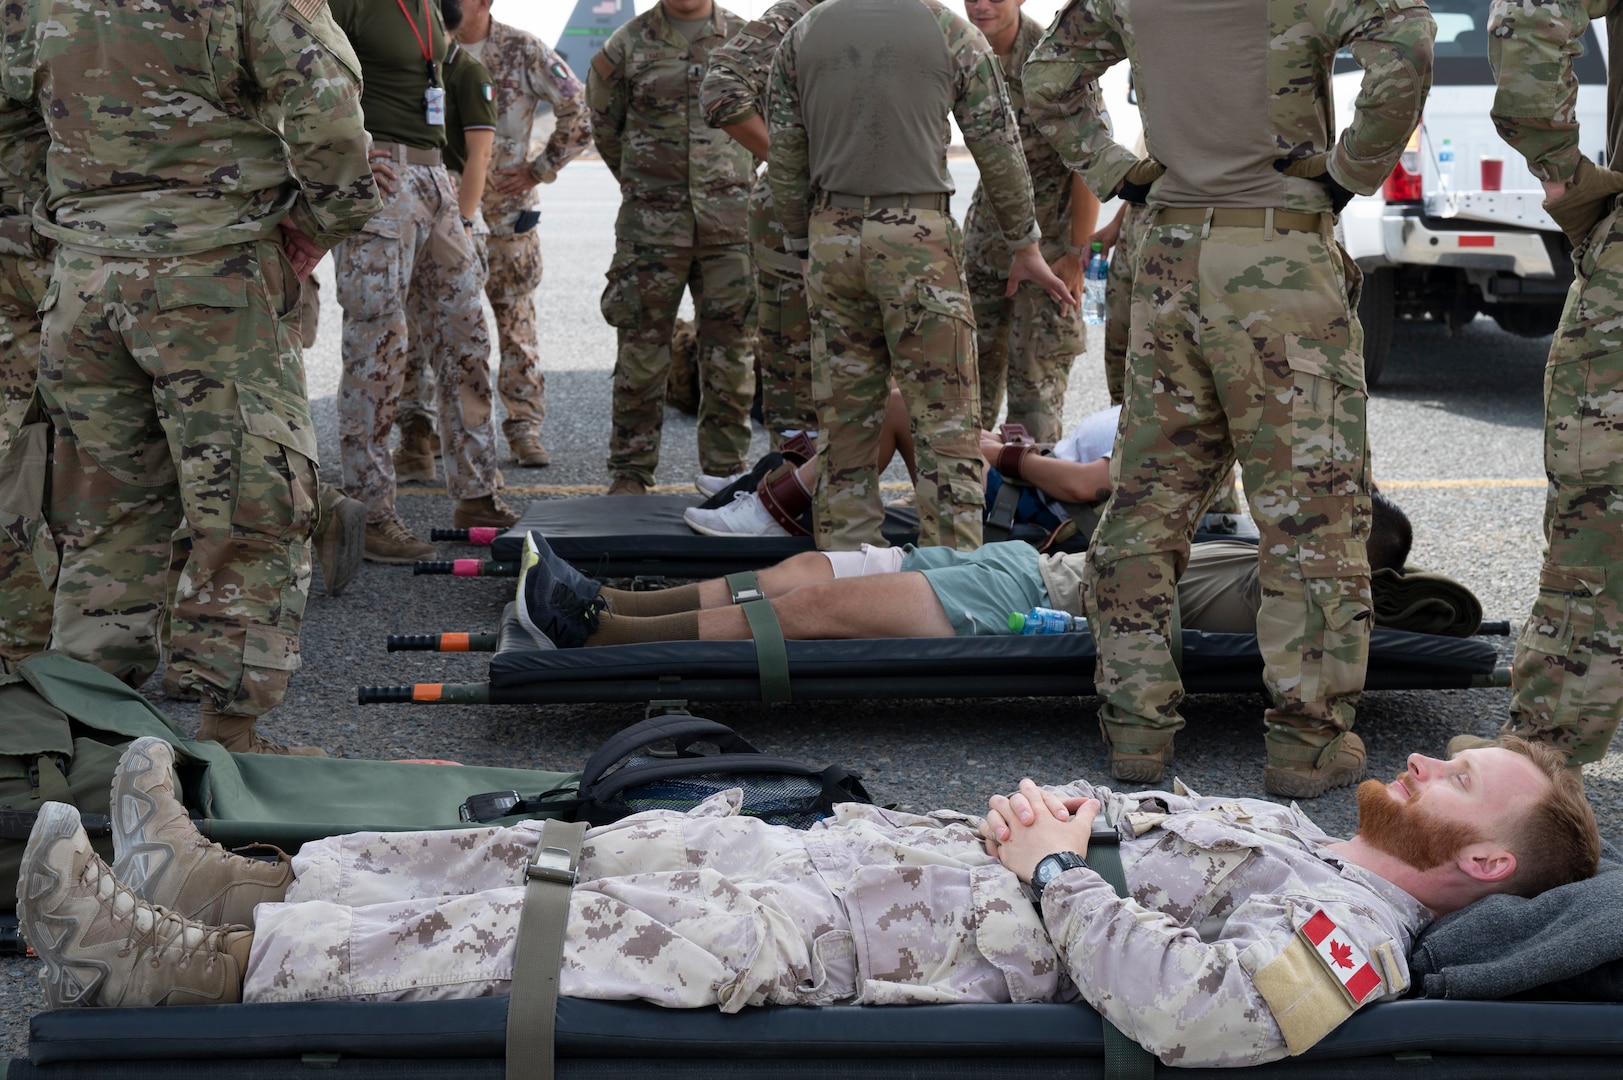 Capt. Stefan Sabo-Walsh, an infantry officer in the Canadian Armed Forces, assists the coalition forces training exercise as a mock patient to be treated by the 405th Expeditionary Aeromedical Evacuation Squadron at Ali Al Salem Air Base, Kuwait, July 29, 2022. Coalition partners were able to learn and share tactics and techniques with each other so in an emergency response situation, the 405th EAES and coalition partners would be able to operate with the strength and coordination of one team. (U.S. Air Force photo by Staff Sgt. Dalton Williams)